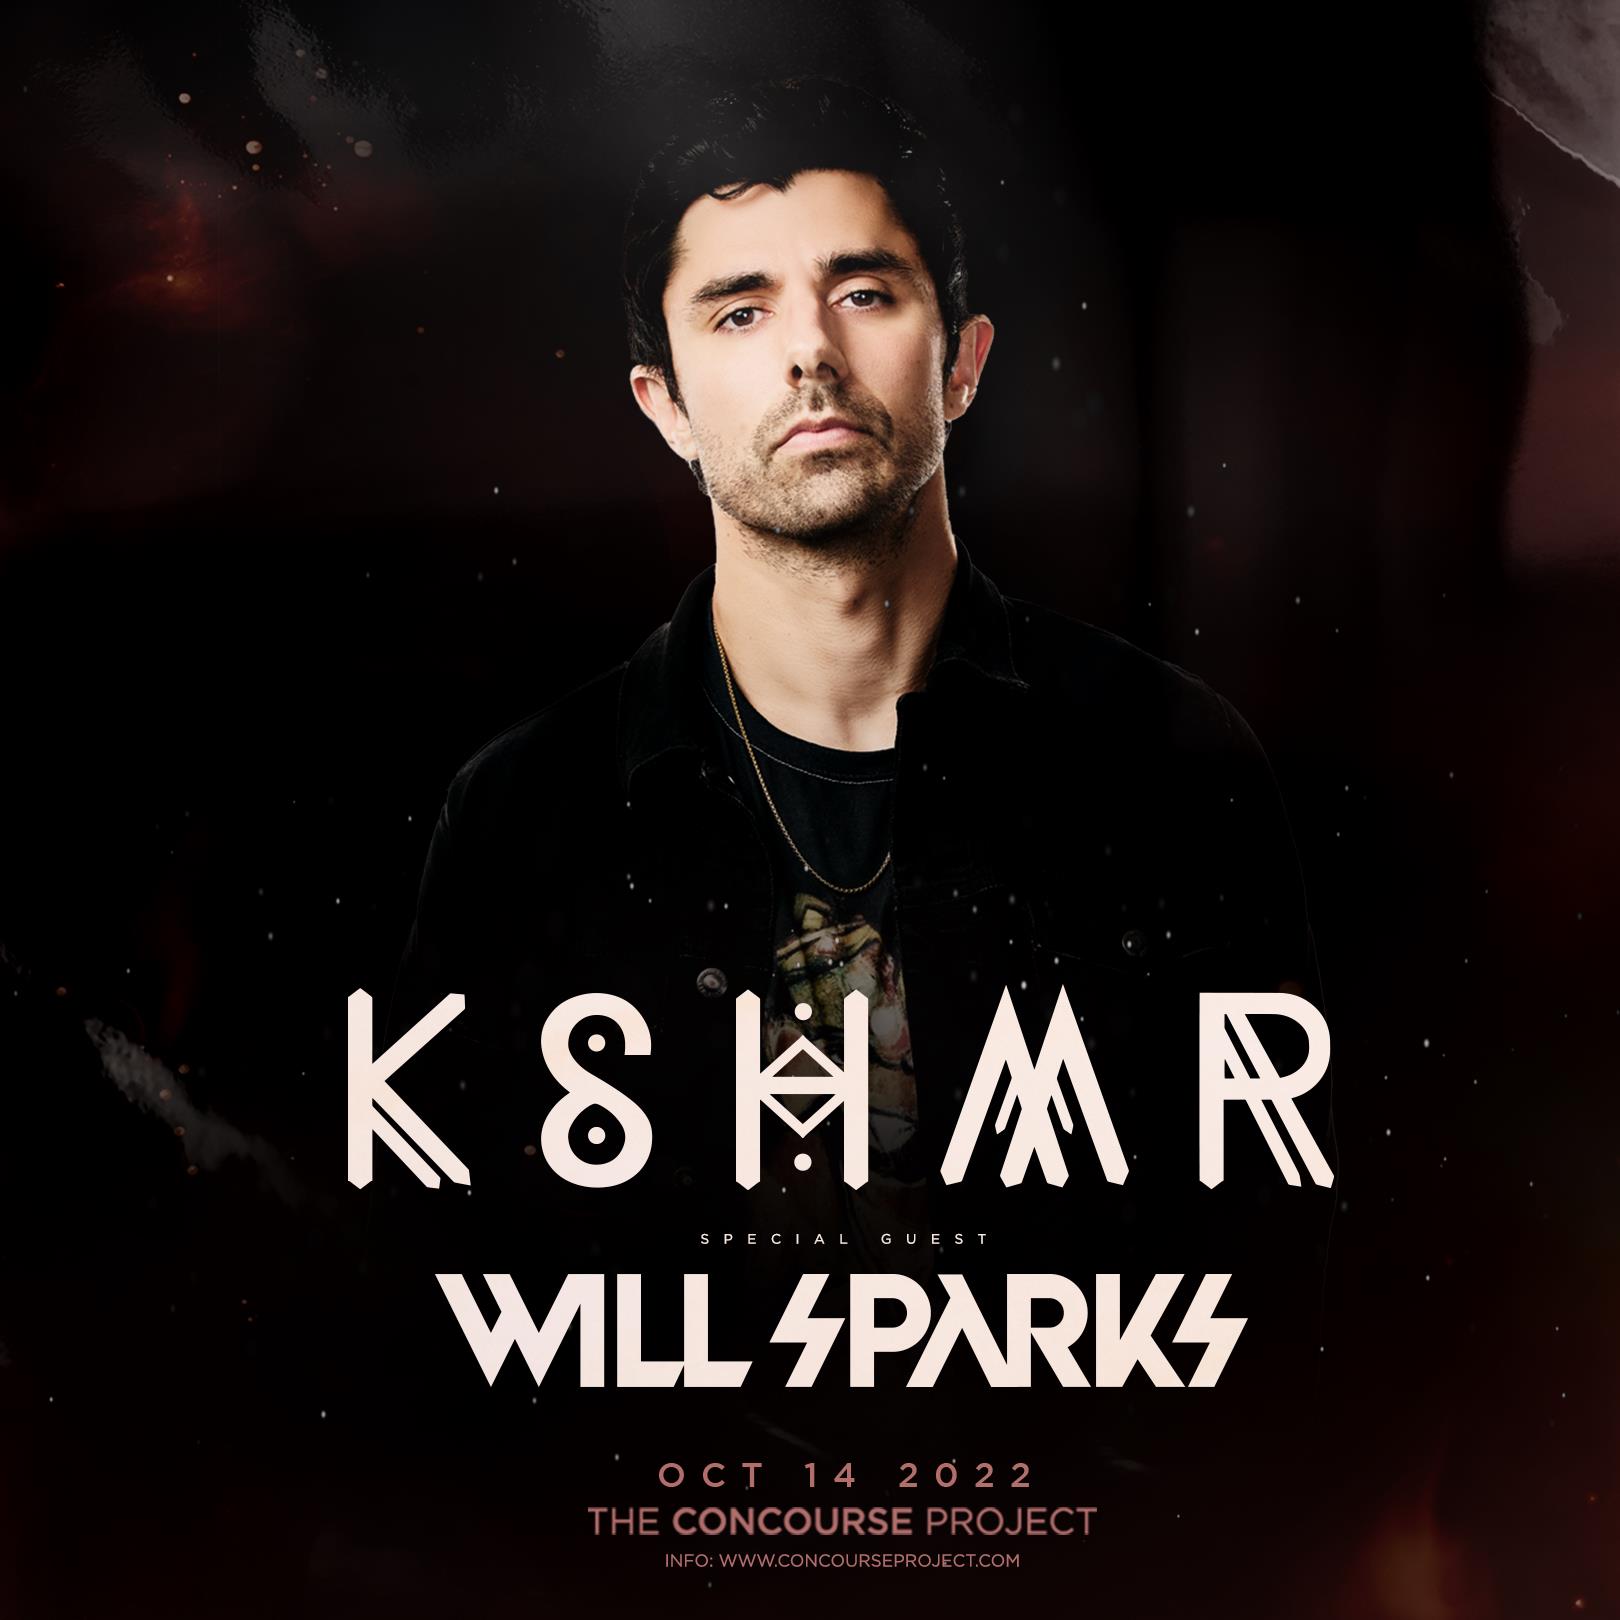 KSHMR + Will Sparks at The Concourse Project